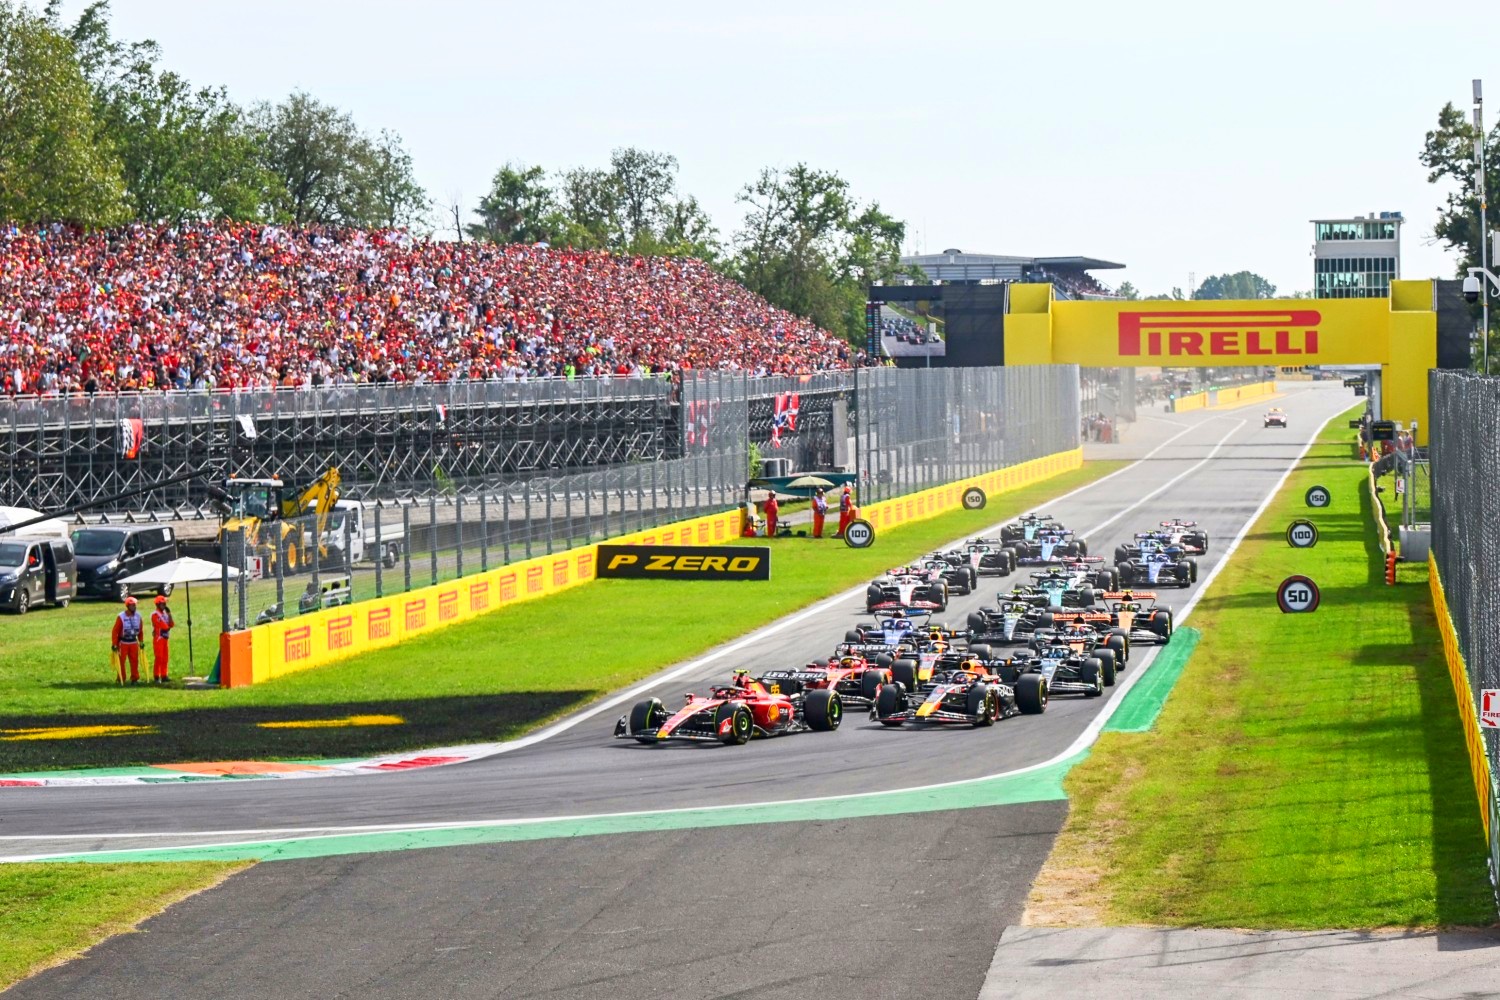 AUTODROMO NAZIONALE MONZA, ITALY - SEPTEMBER 03: Carlos Sainz, Ferrari SF-23, leads Max Verstappen, Red Bull Racing RB19, Charles Leclerc, Ferrari SF-23, George Russell, Mercedes F1 W14, and the rest of the field at the start during the Italian GP at Autodromo Nazionale Monza on Sunday September 03, 2023 in Monza, Italy. (Photo by Simon Galloway / LAT Images)